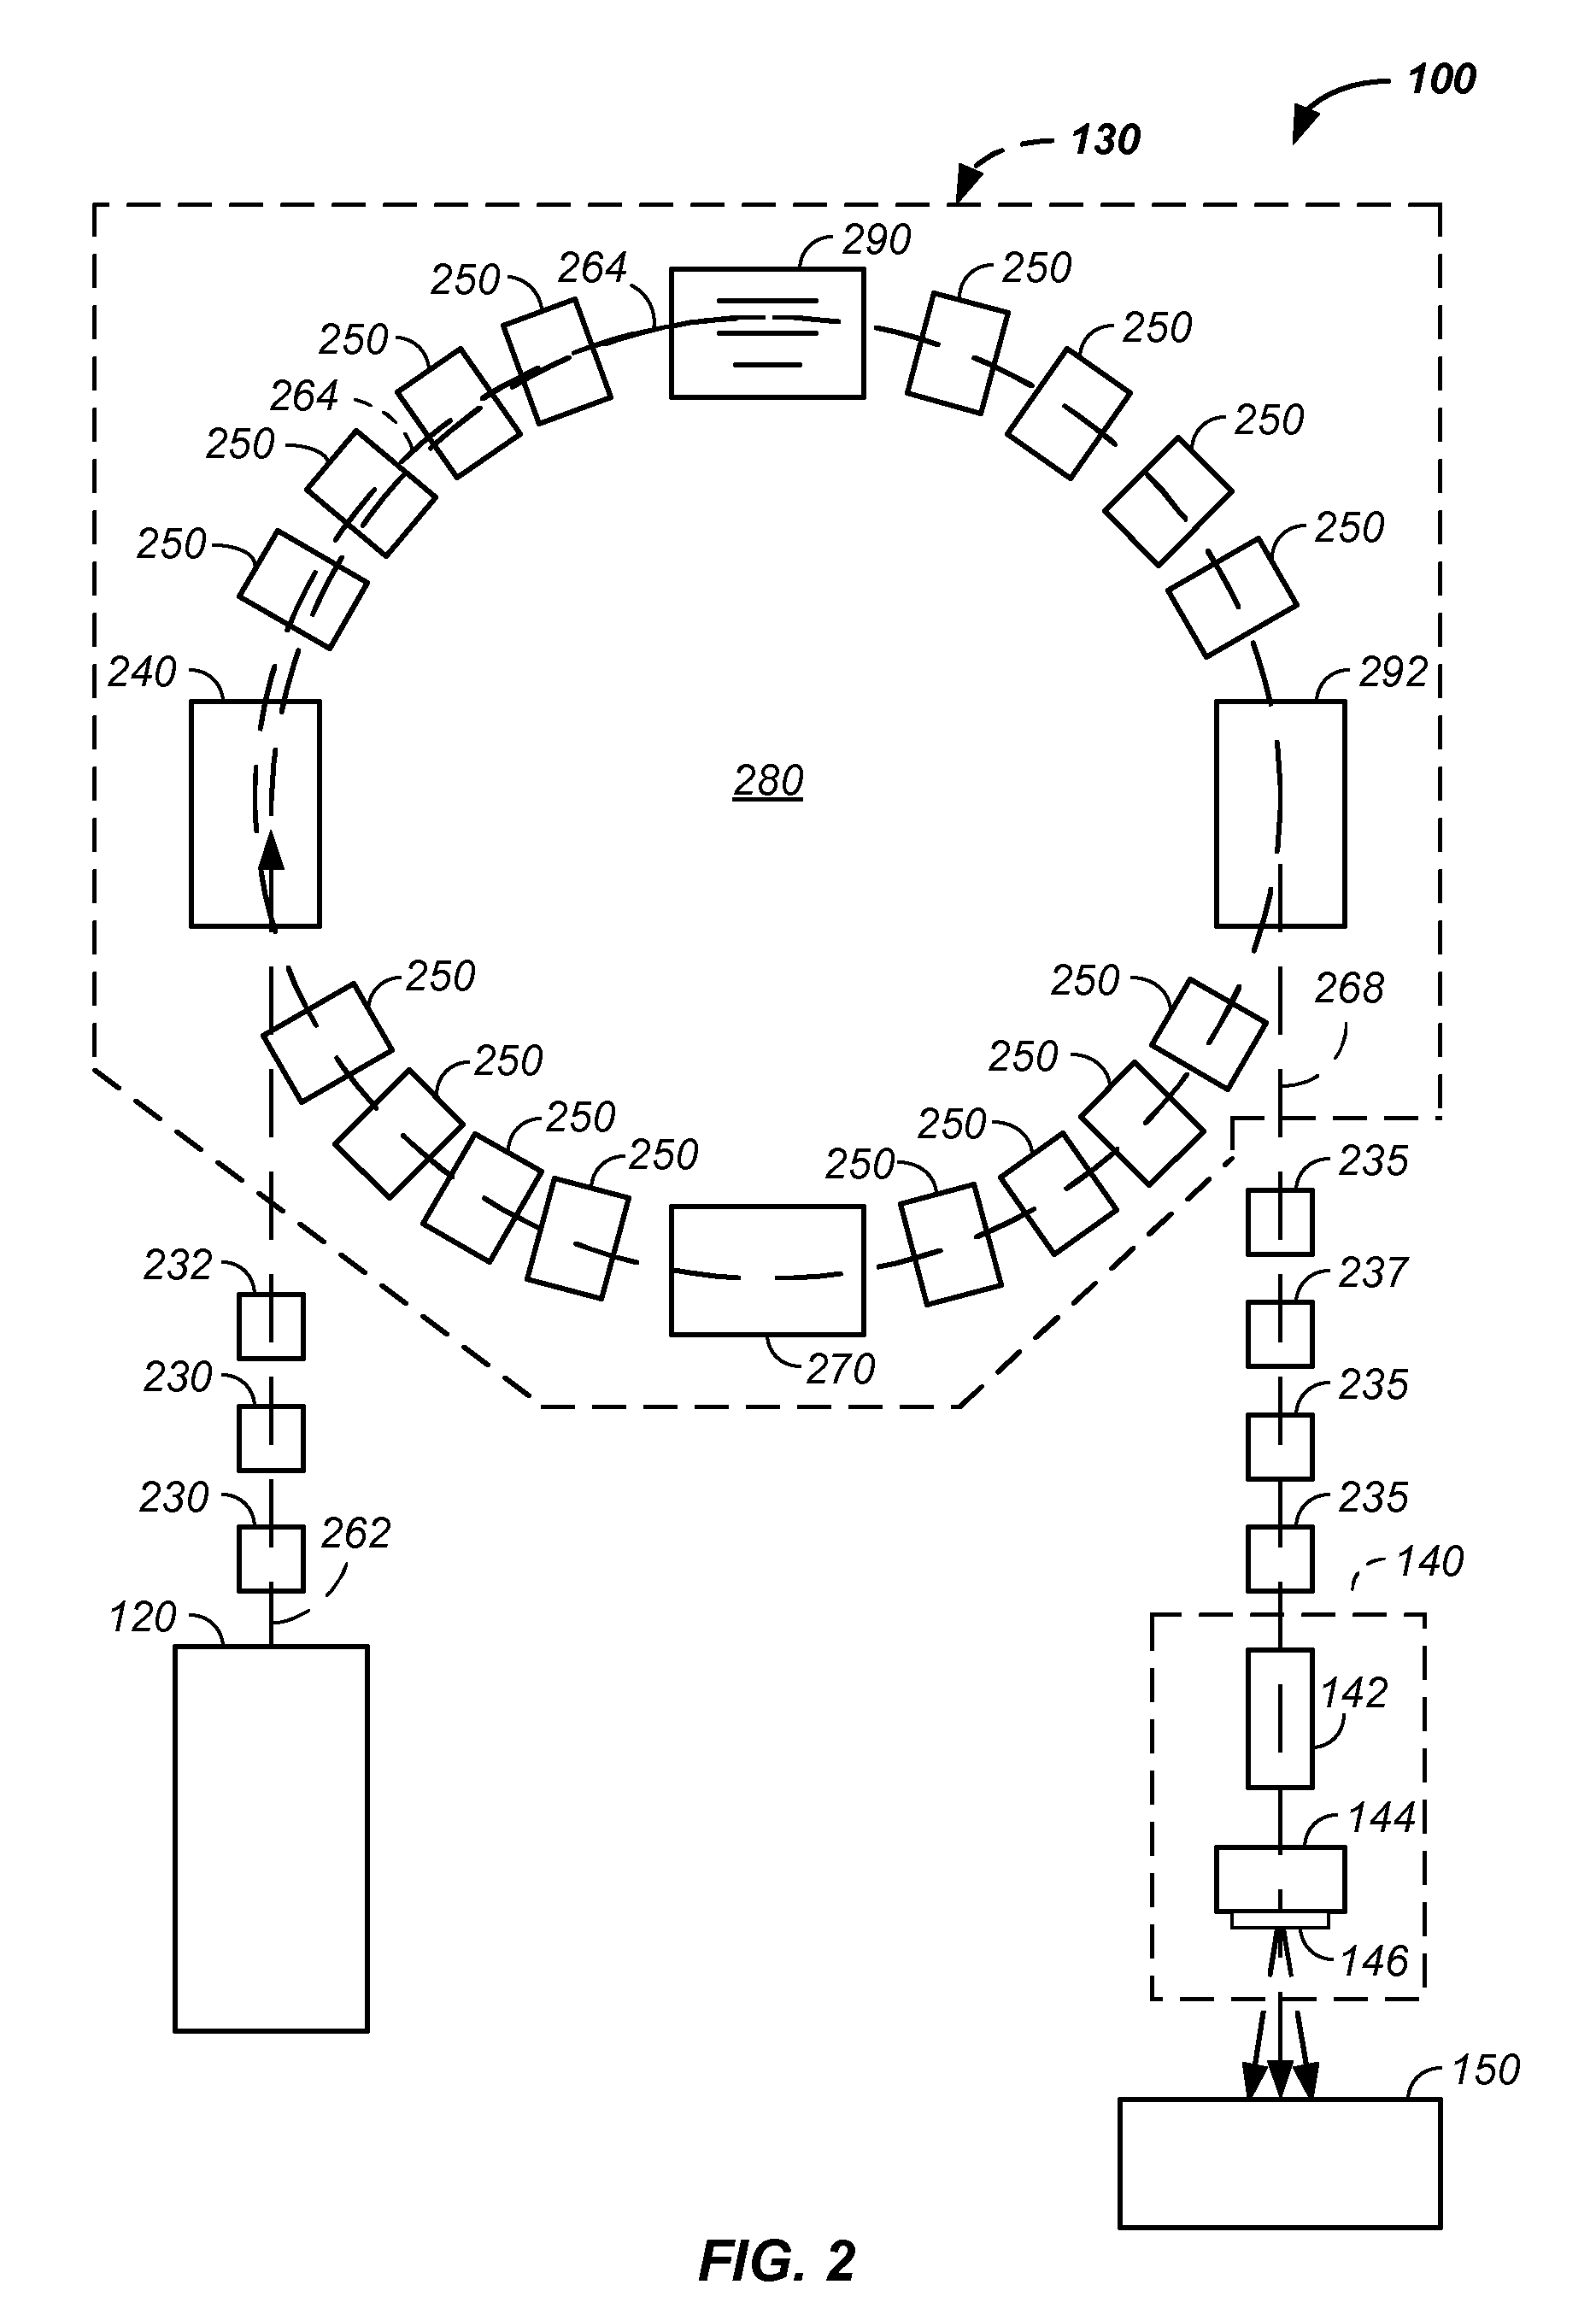 Multi-axis / multi-field charged particle cancer therapy method and apparatus